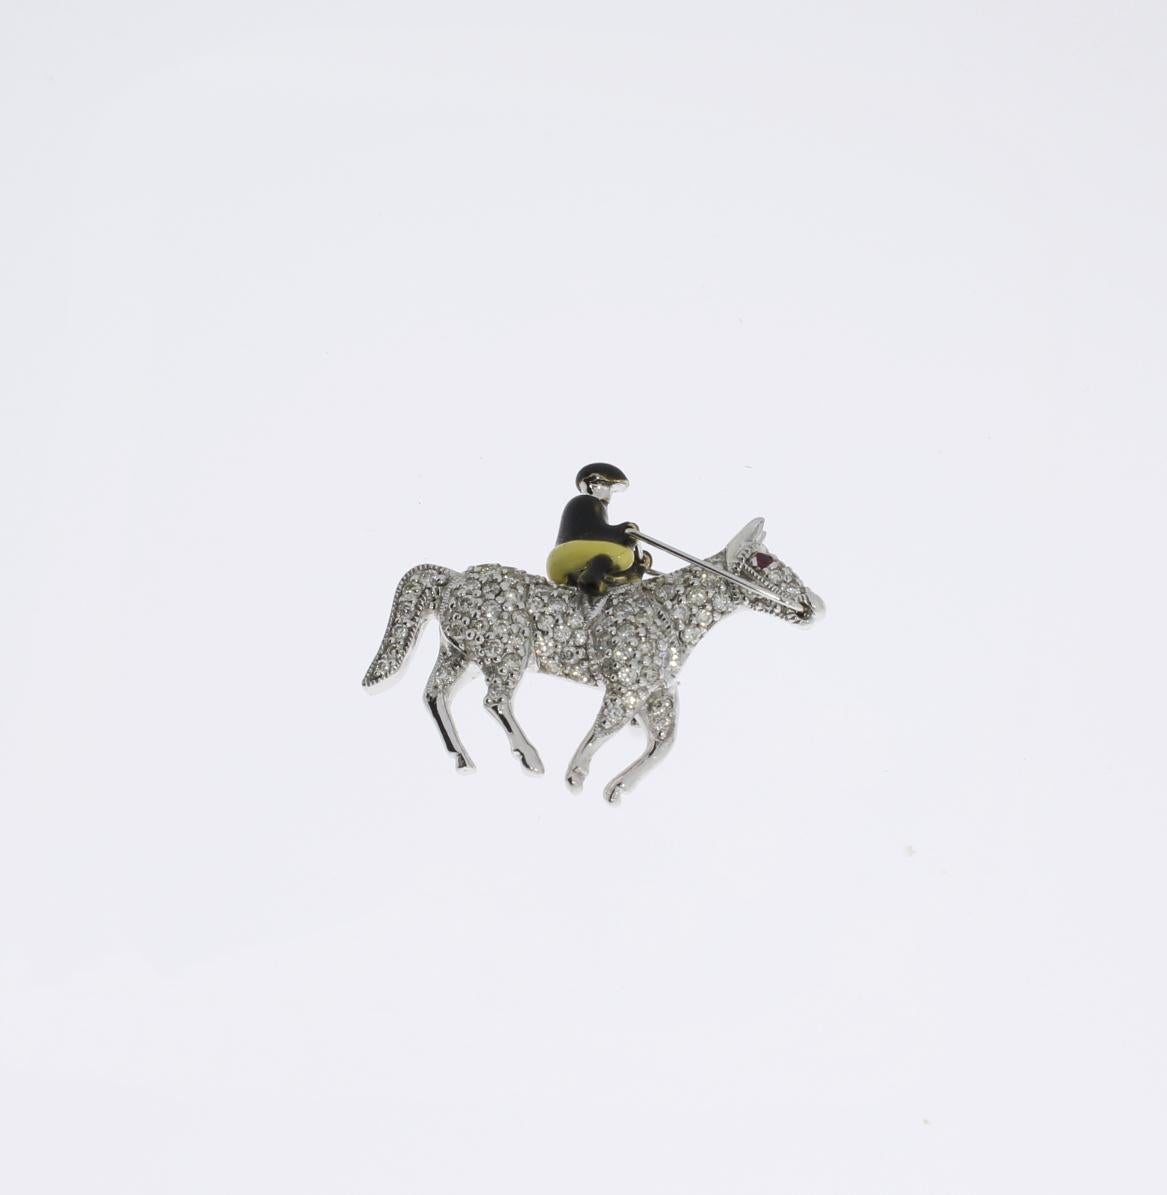 Europe, late 20th century. The horse set with 78 brilliant-cut diamonds weighing approximately 0,93 ct. and with a ruby of about 0,04 ct. The rider embellished with enamel. Made in 18K white gold. Total weight: ca. 11 g. 
Dimensions: 0.98 x 1.3 in (